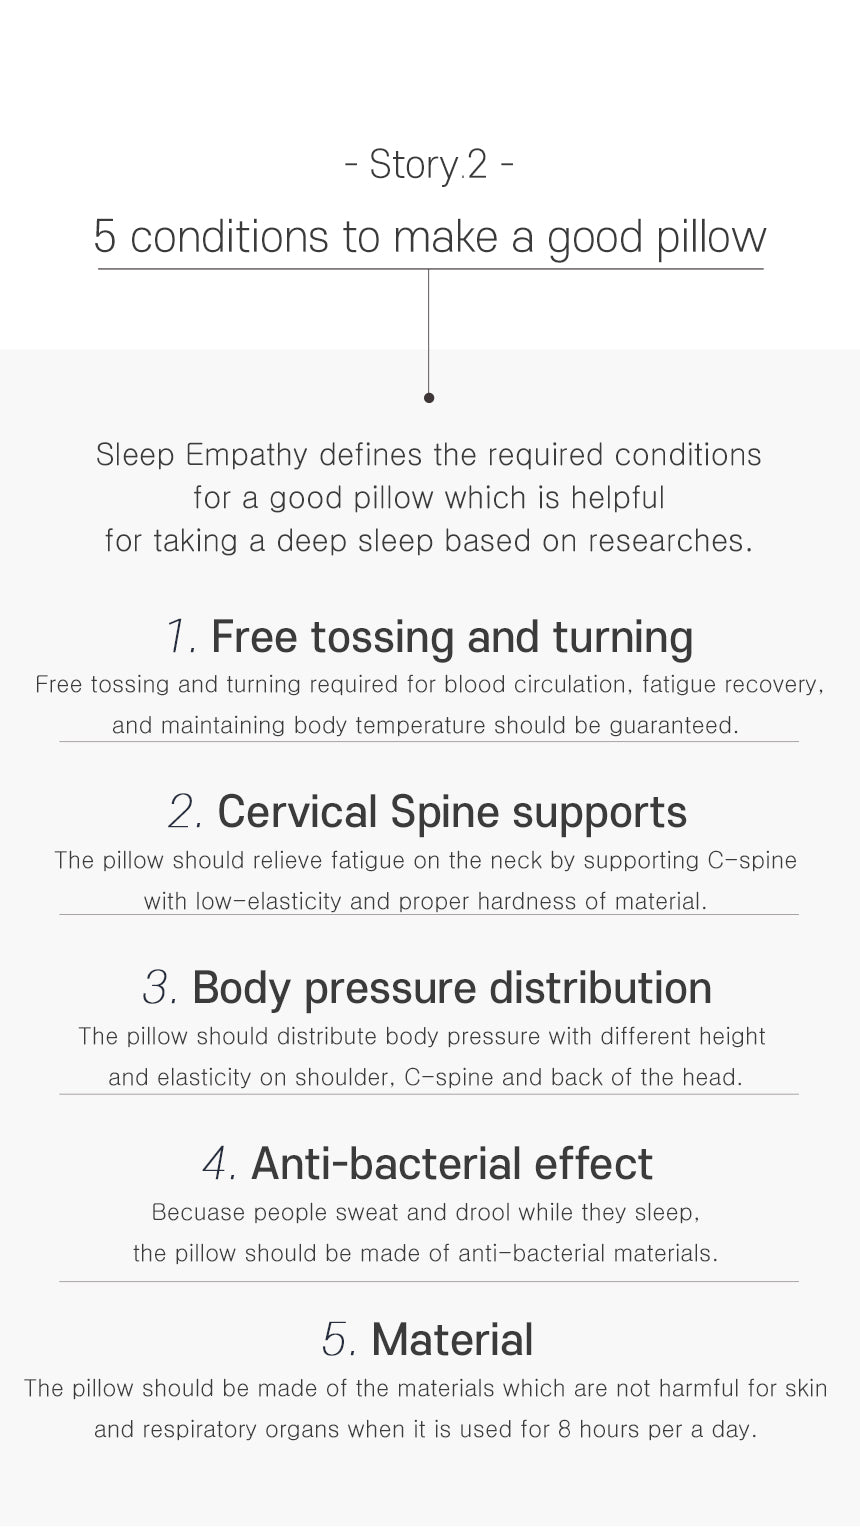 5 condition to make a goodl pillow. 1. Free tossing and turning 2. Cervical Spine Supports 3. Body pressure distribution. 4. Antibacterial effect, 5. Good material